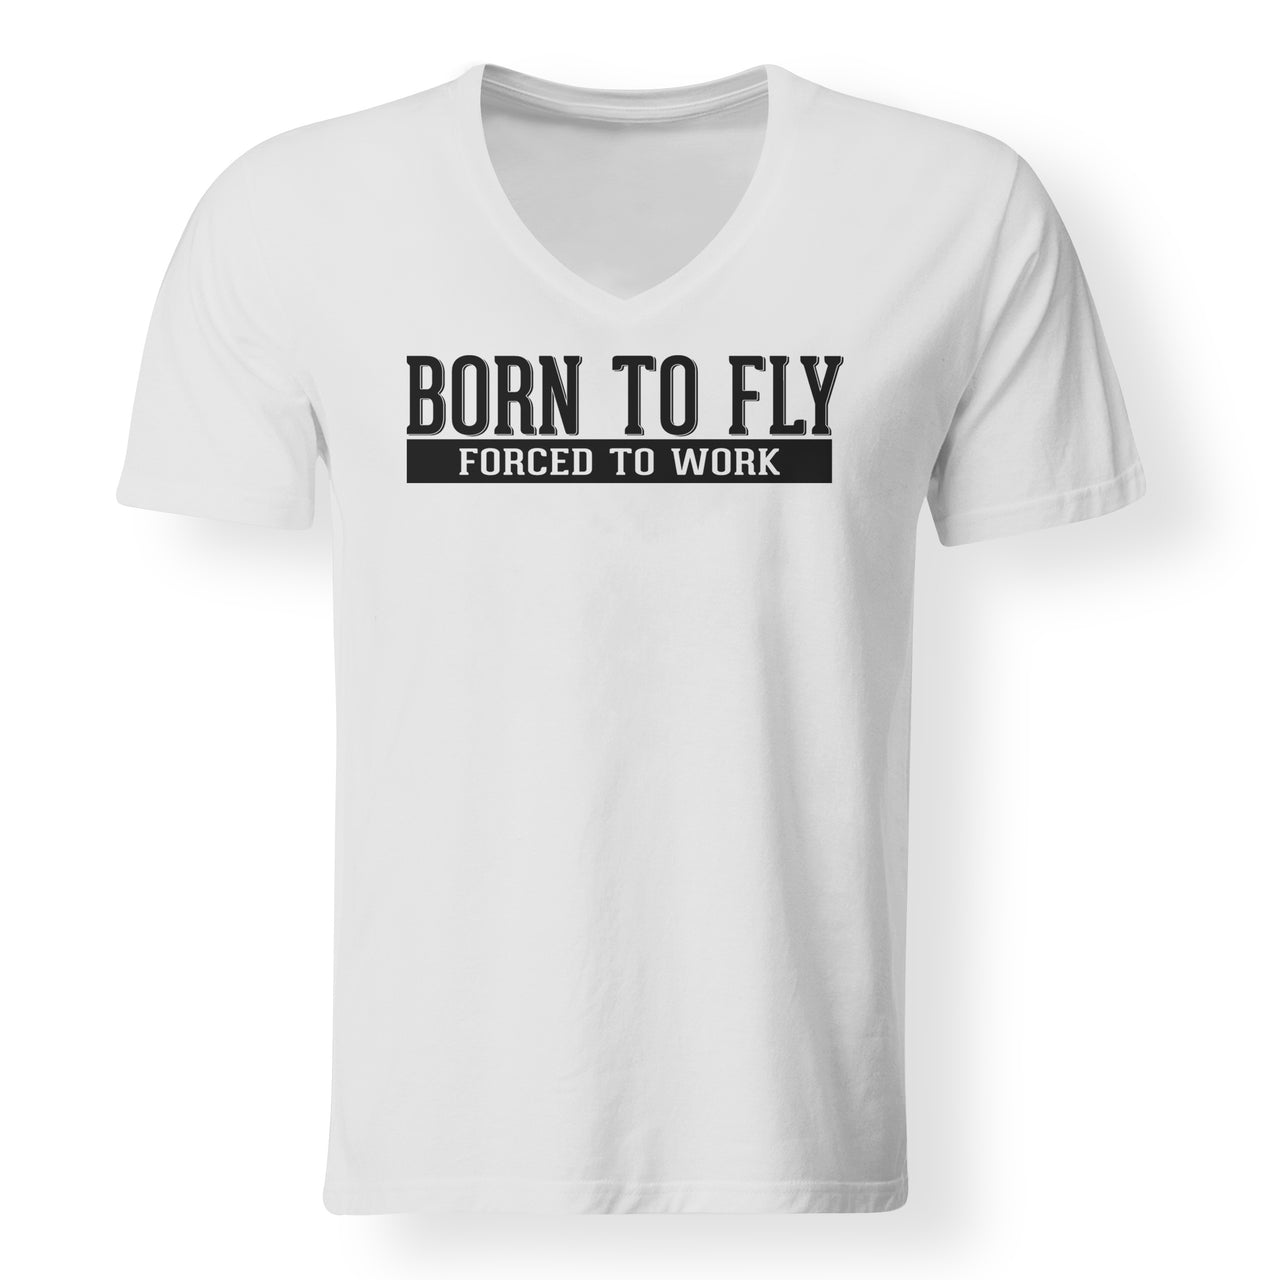 Born To Fly Forced To Work Designed V-Neck T-Shirts